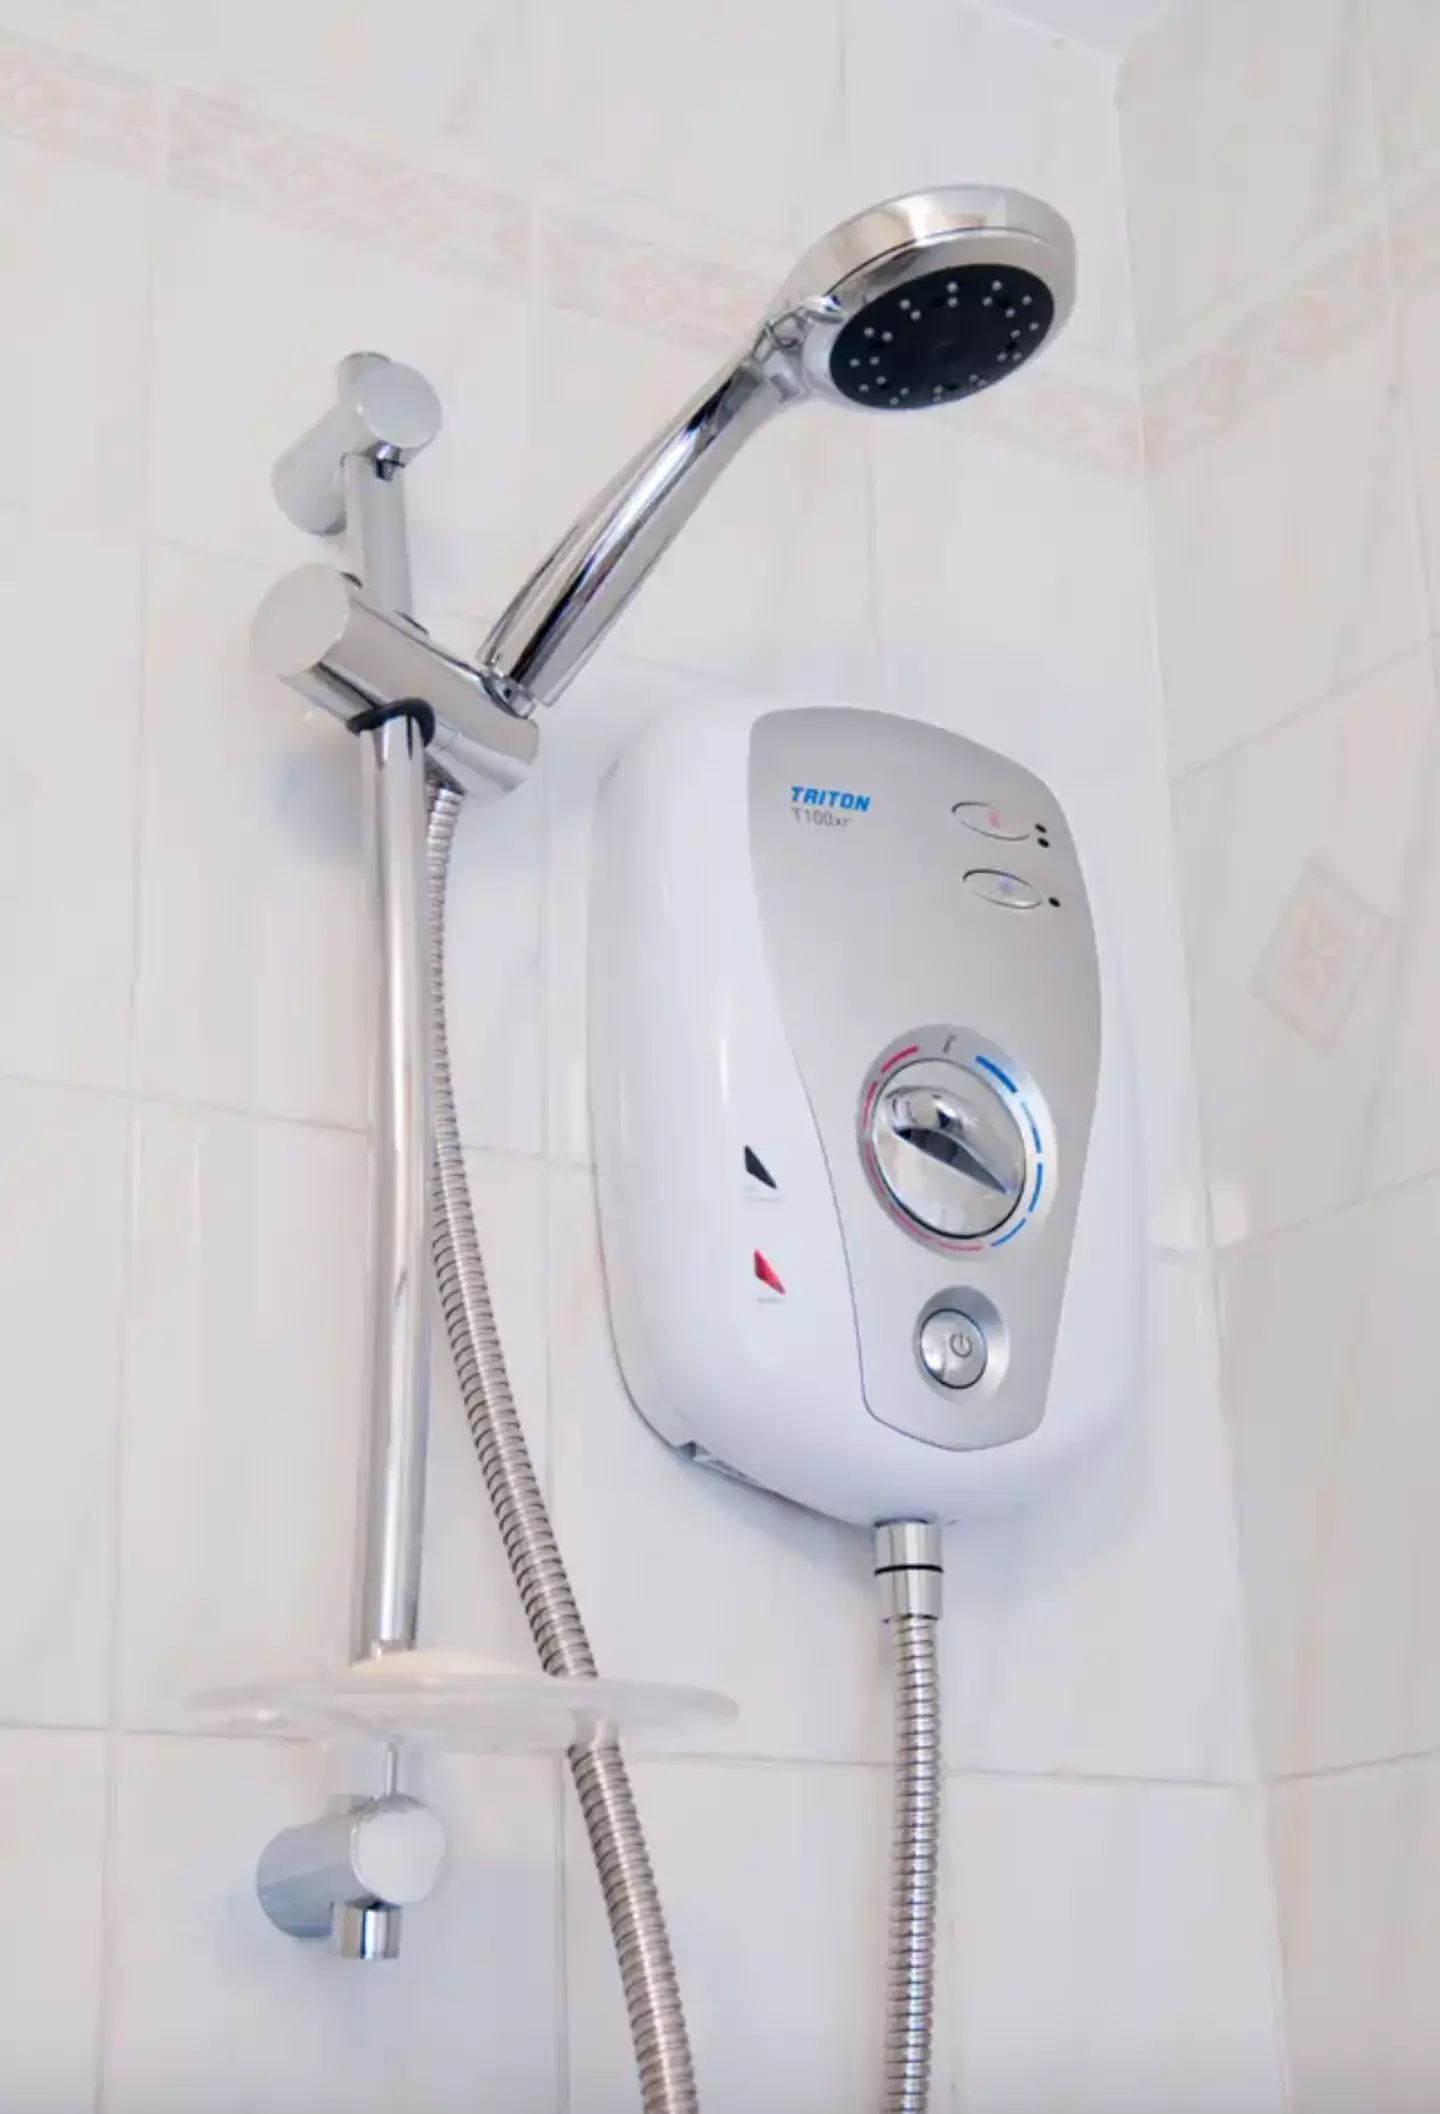 Electric showers are significantly more expensive after 1 April.